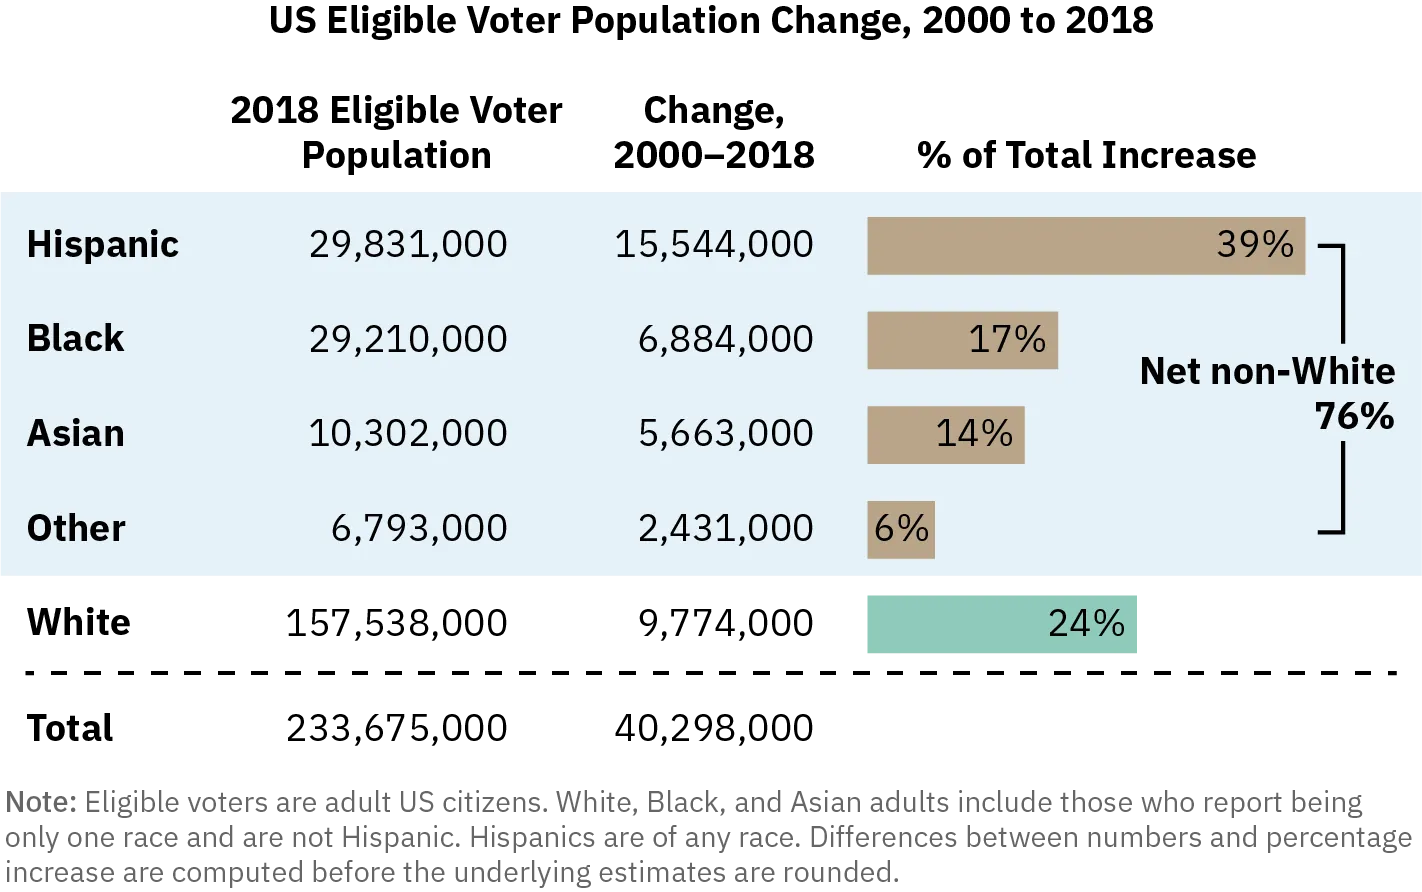 A tabular representation of the US eligible voter population shows percentage growth by race between the years 2000 and 2018. Among non-white voters, Hispanic voters are both the largest voting block and recorded the highest growth during the time period.